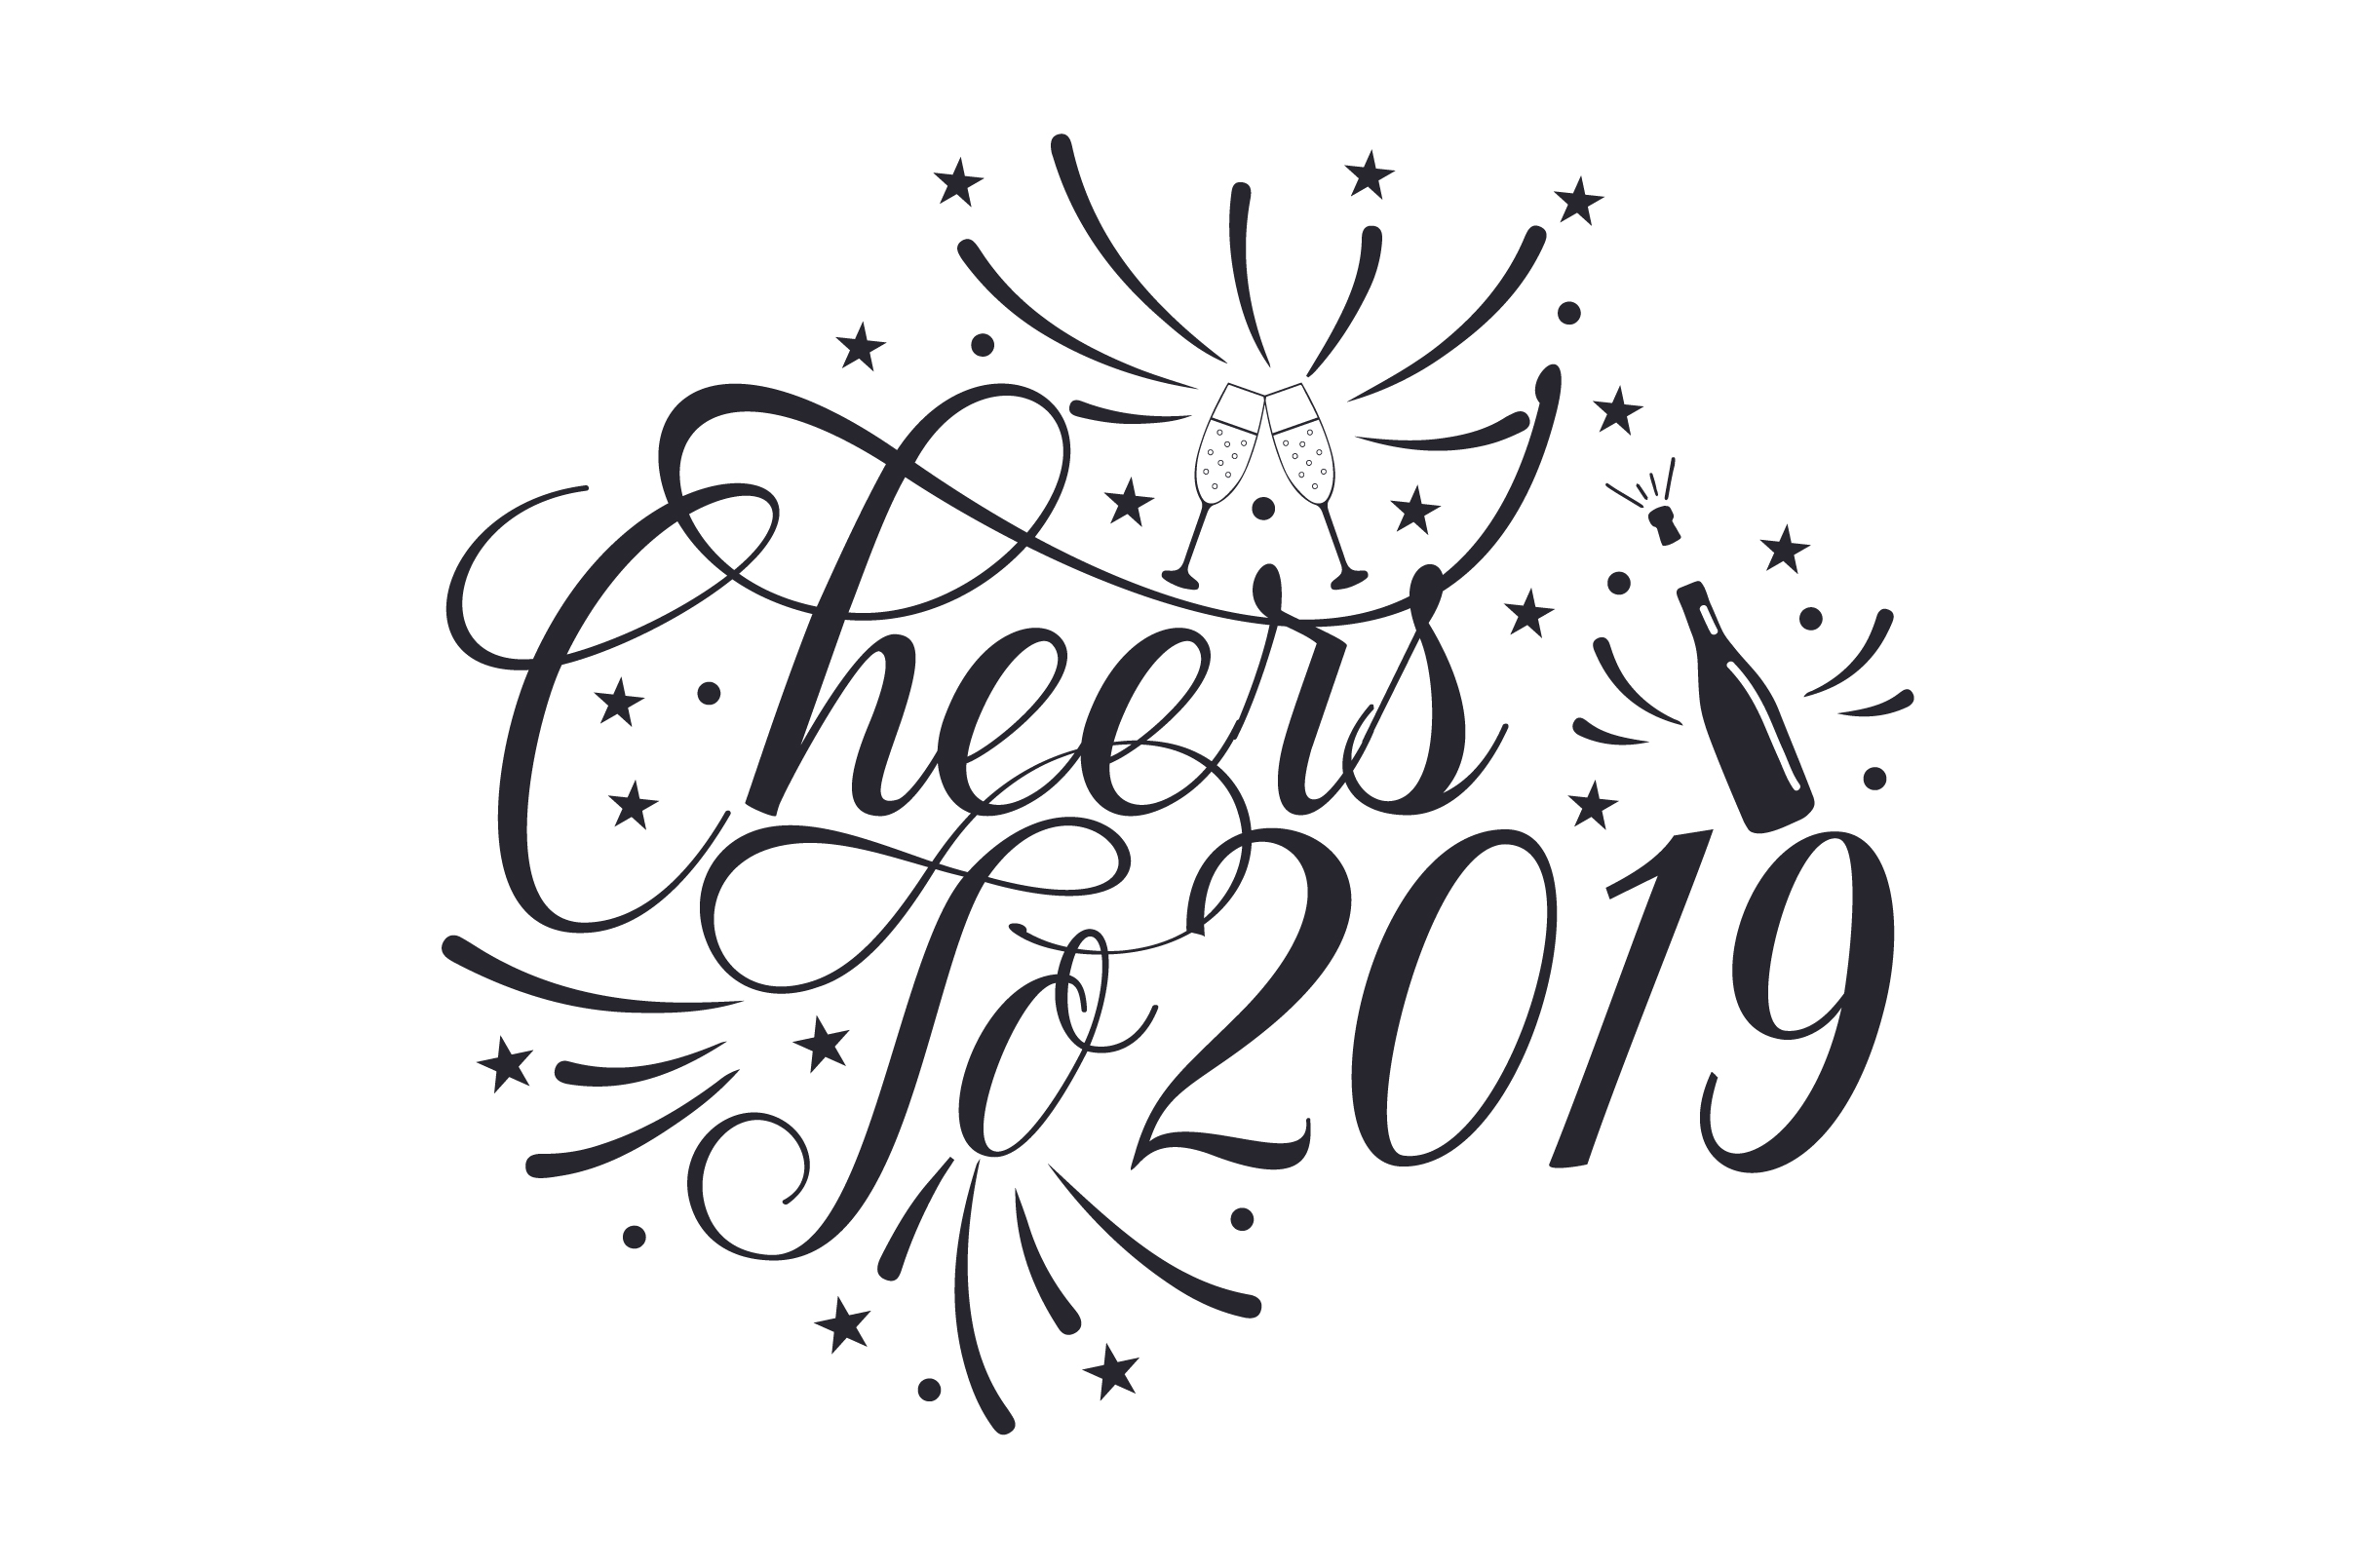 Cheers to 2019 SVG Cut file by Creative Fabrica Crafts - Creative Fabrica.